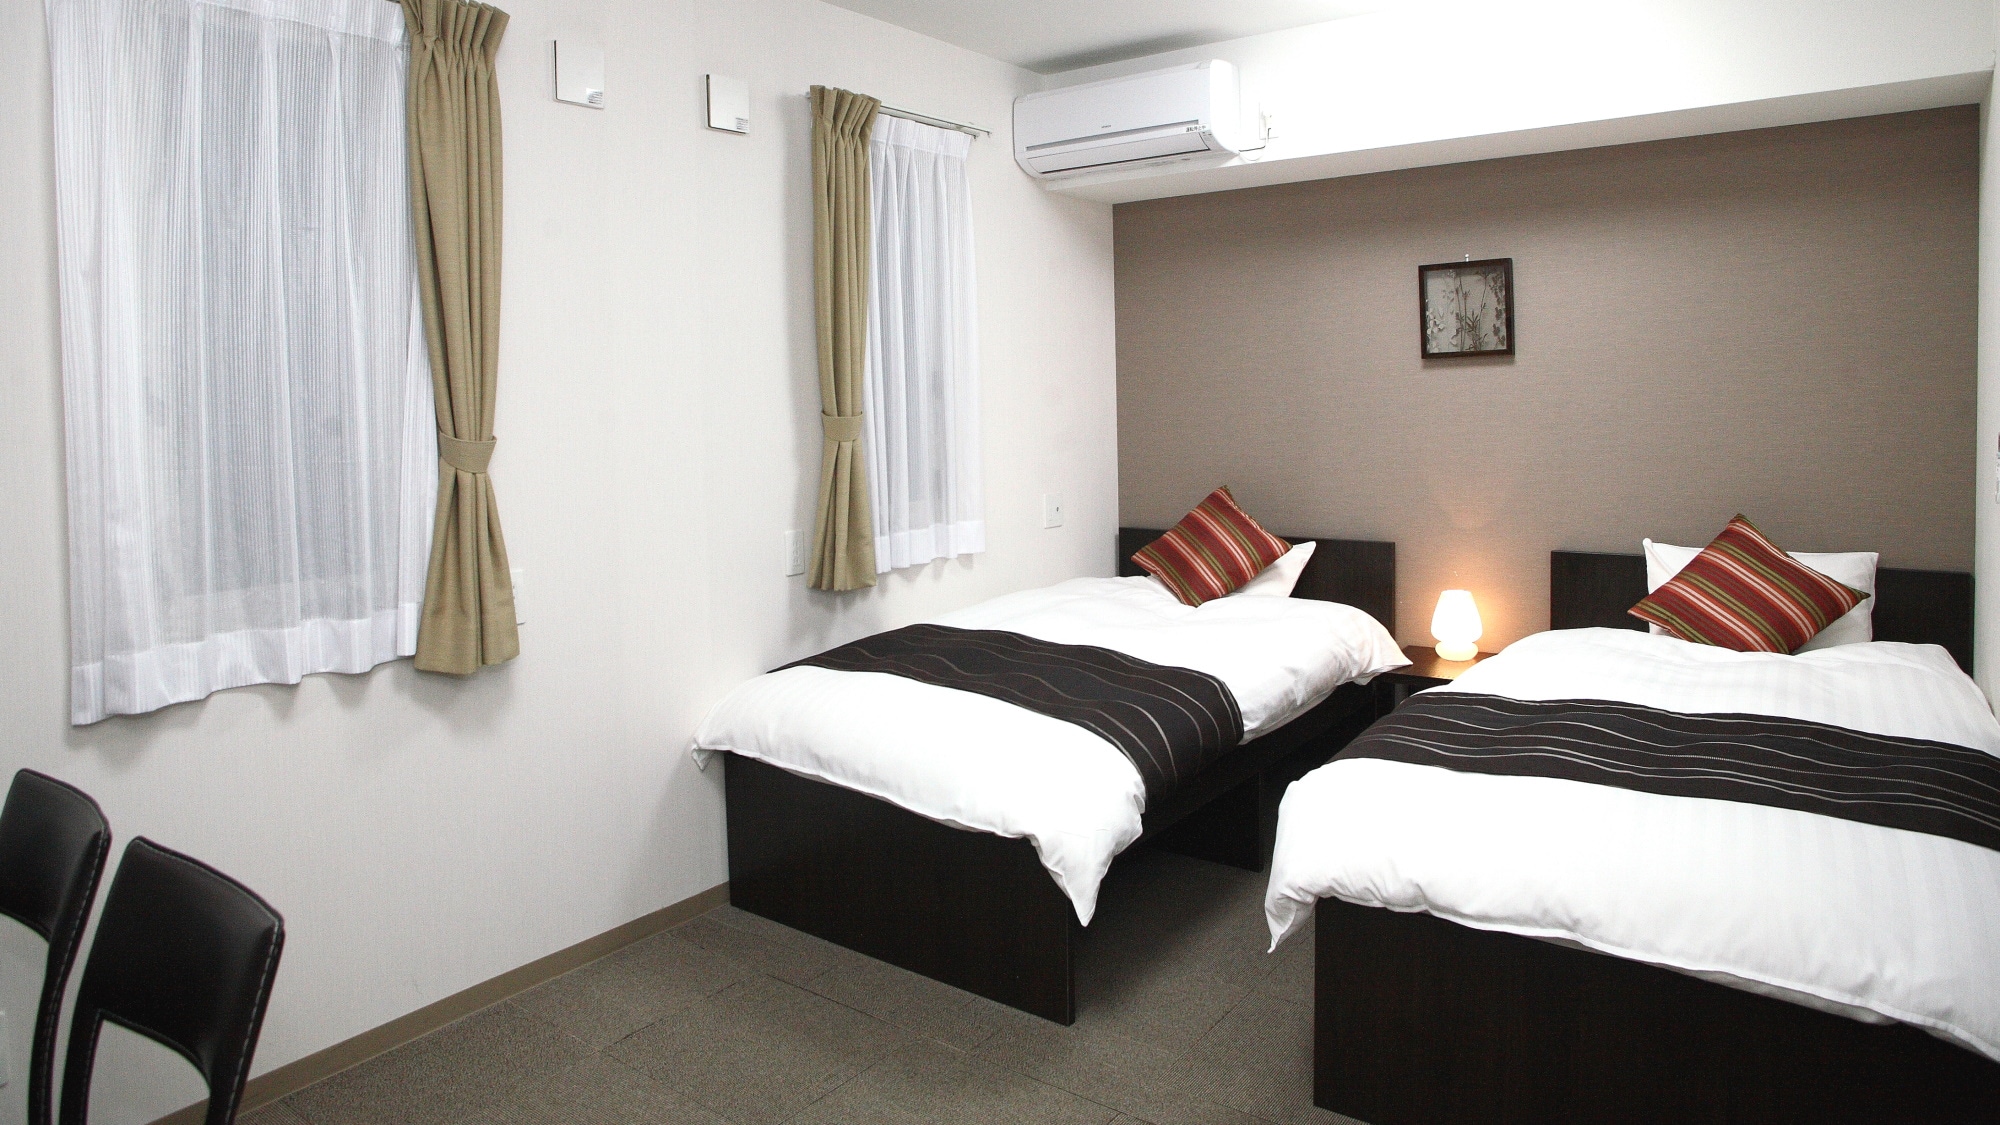 Twin room (23.6㎡) with individual air conditioning and Wi-Fi